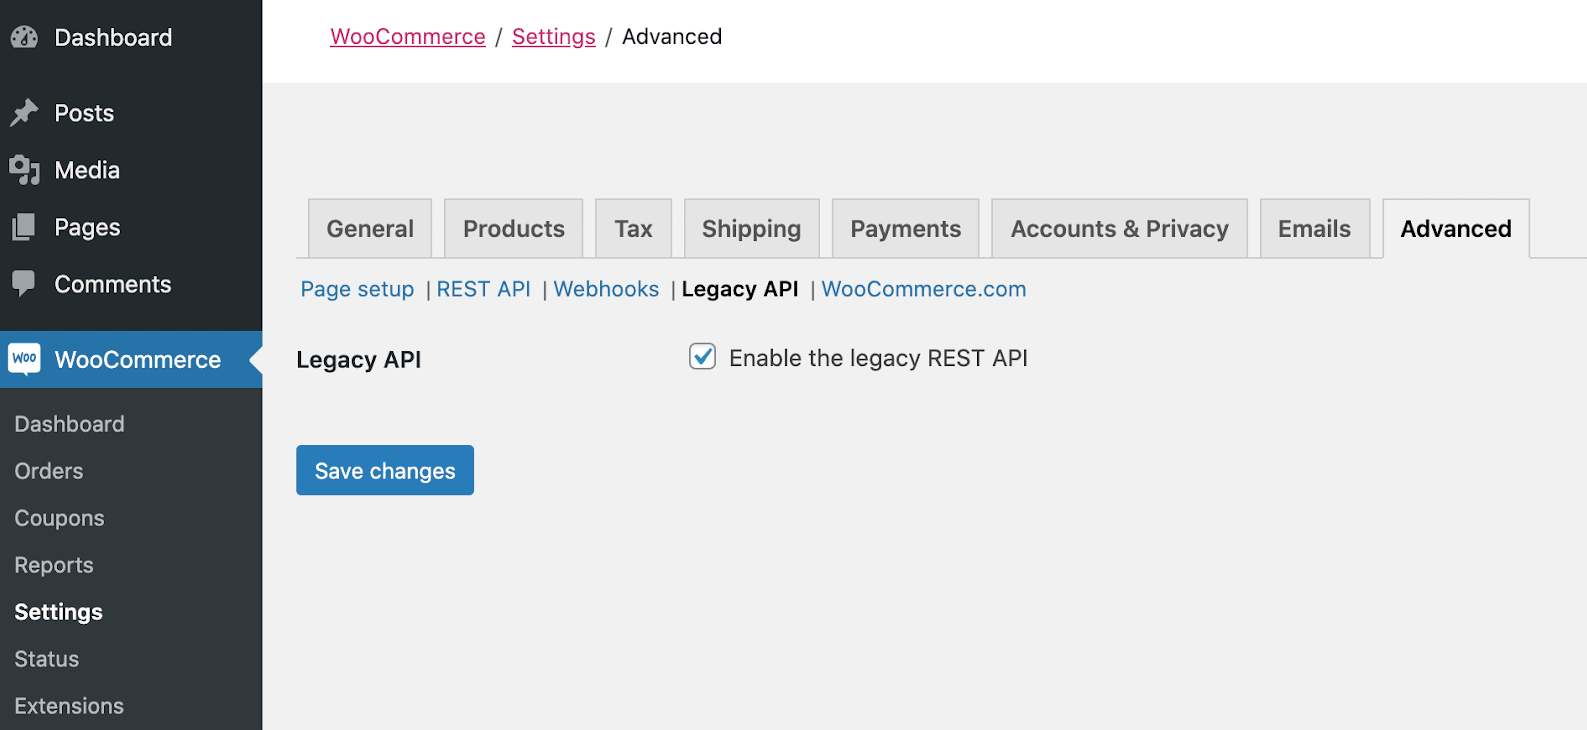 Enable the legacy REST API in the WooCommerce settings